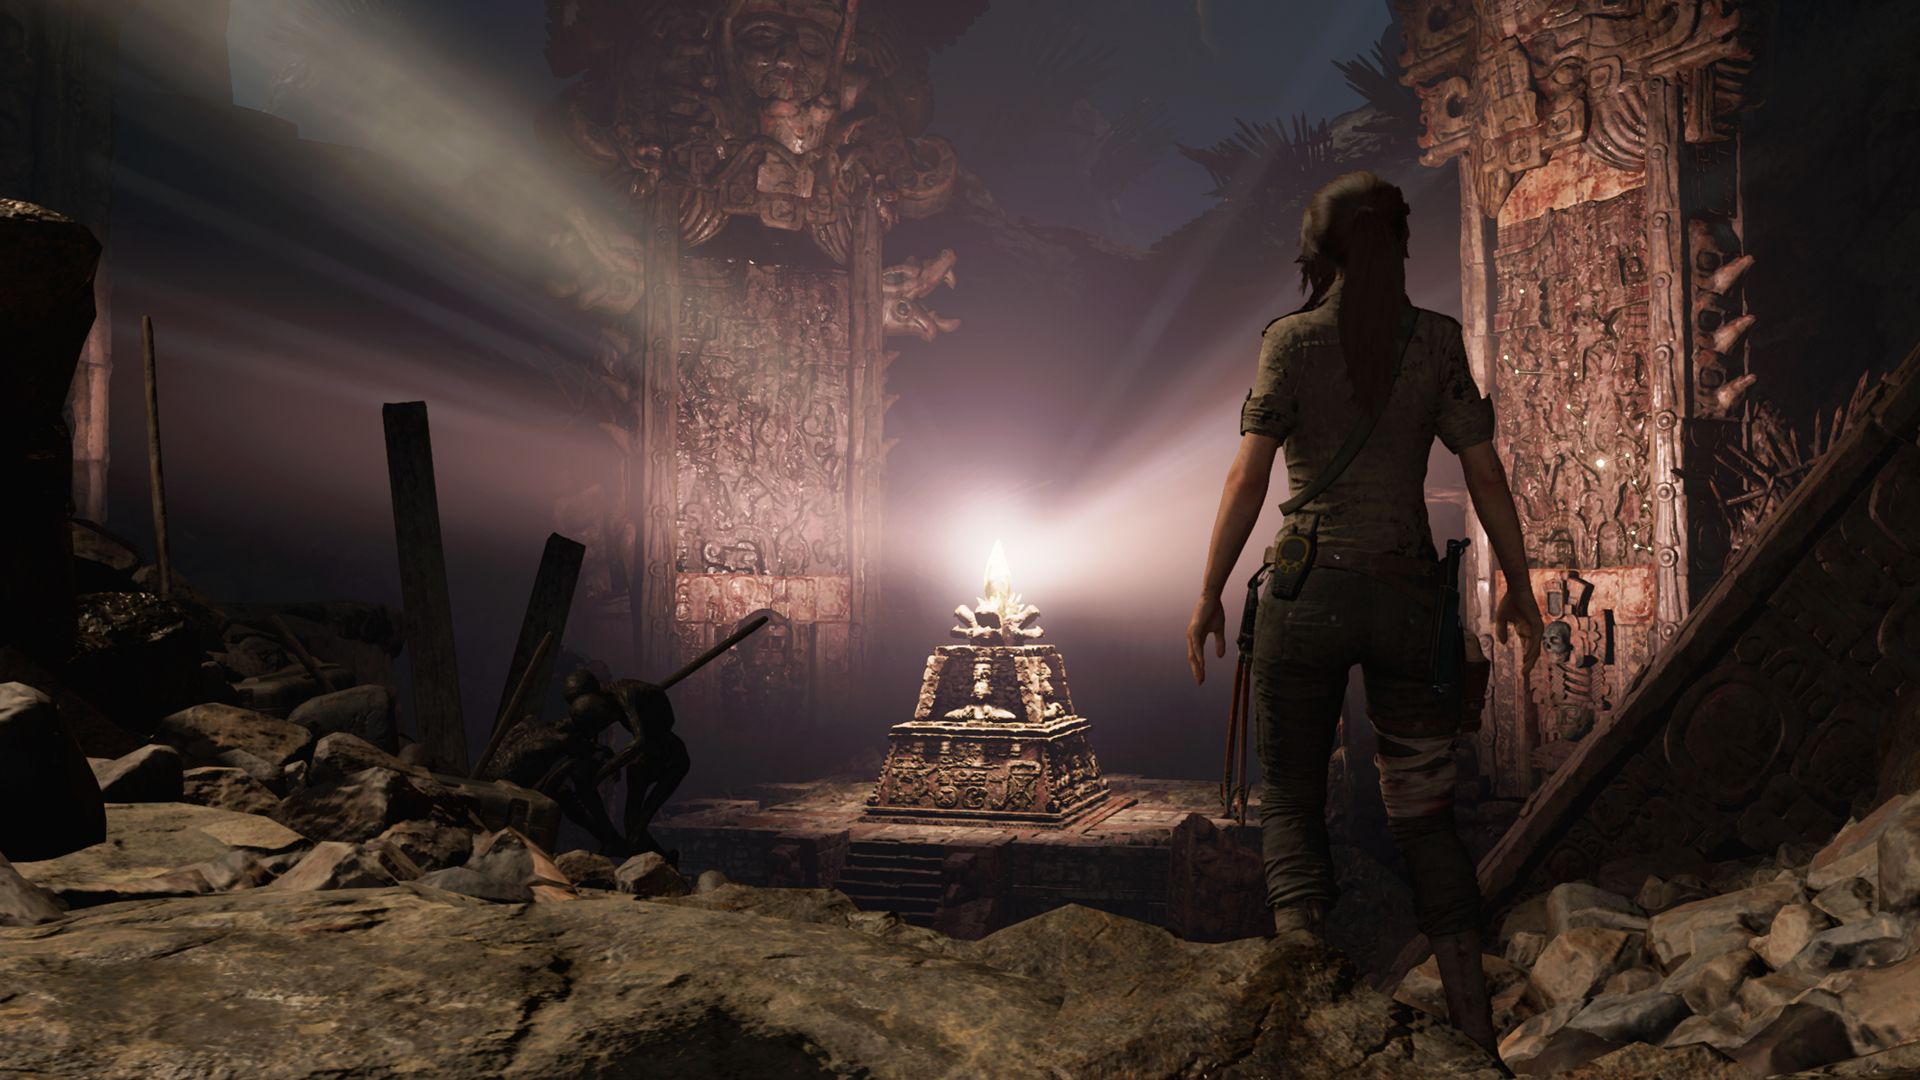 Tomb Raider Death Porn - Tomb Raider Is Best When It's About Raiding Tombs